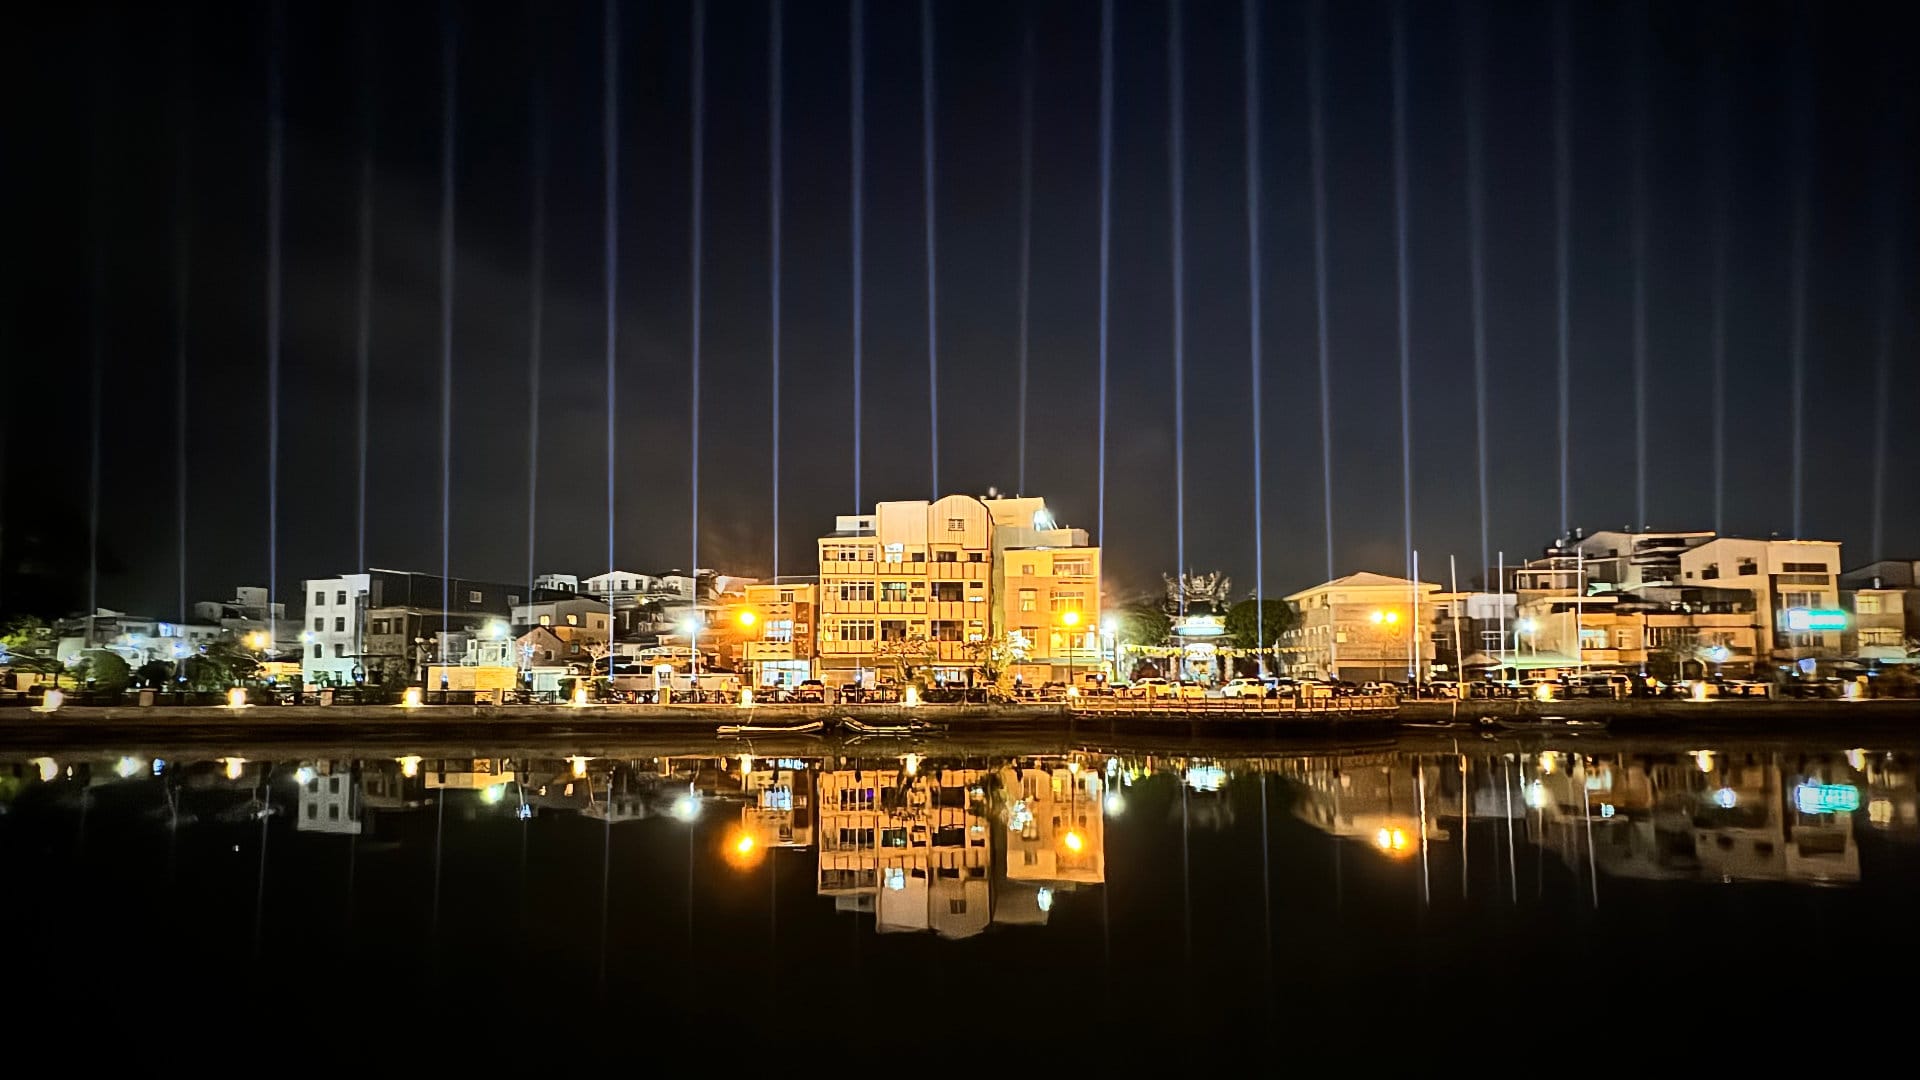 Looking across Tainan Canal. There are three-to-four-story buildings lining the canal. In front of them are dozens of parallel spotlights shooting parallel beams of light into the sky.